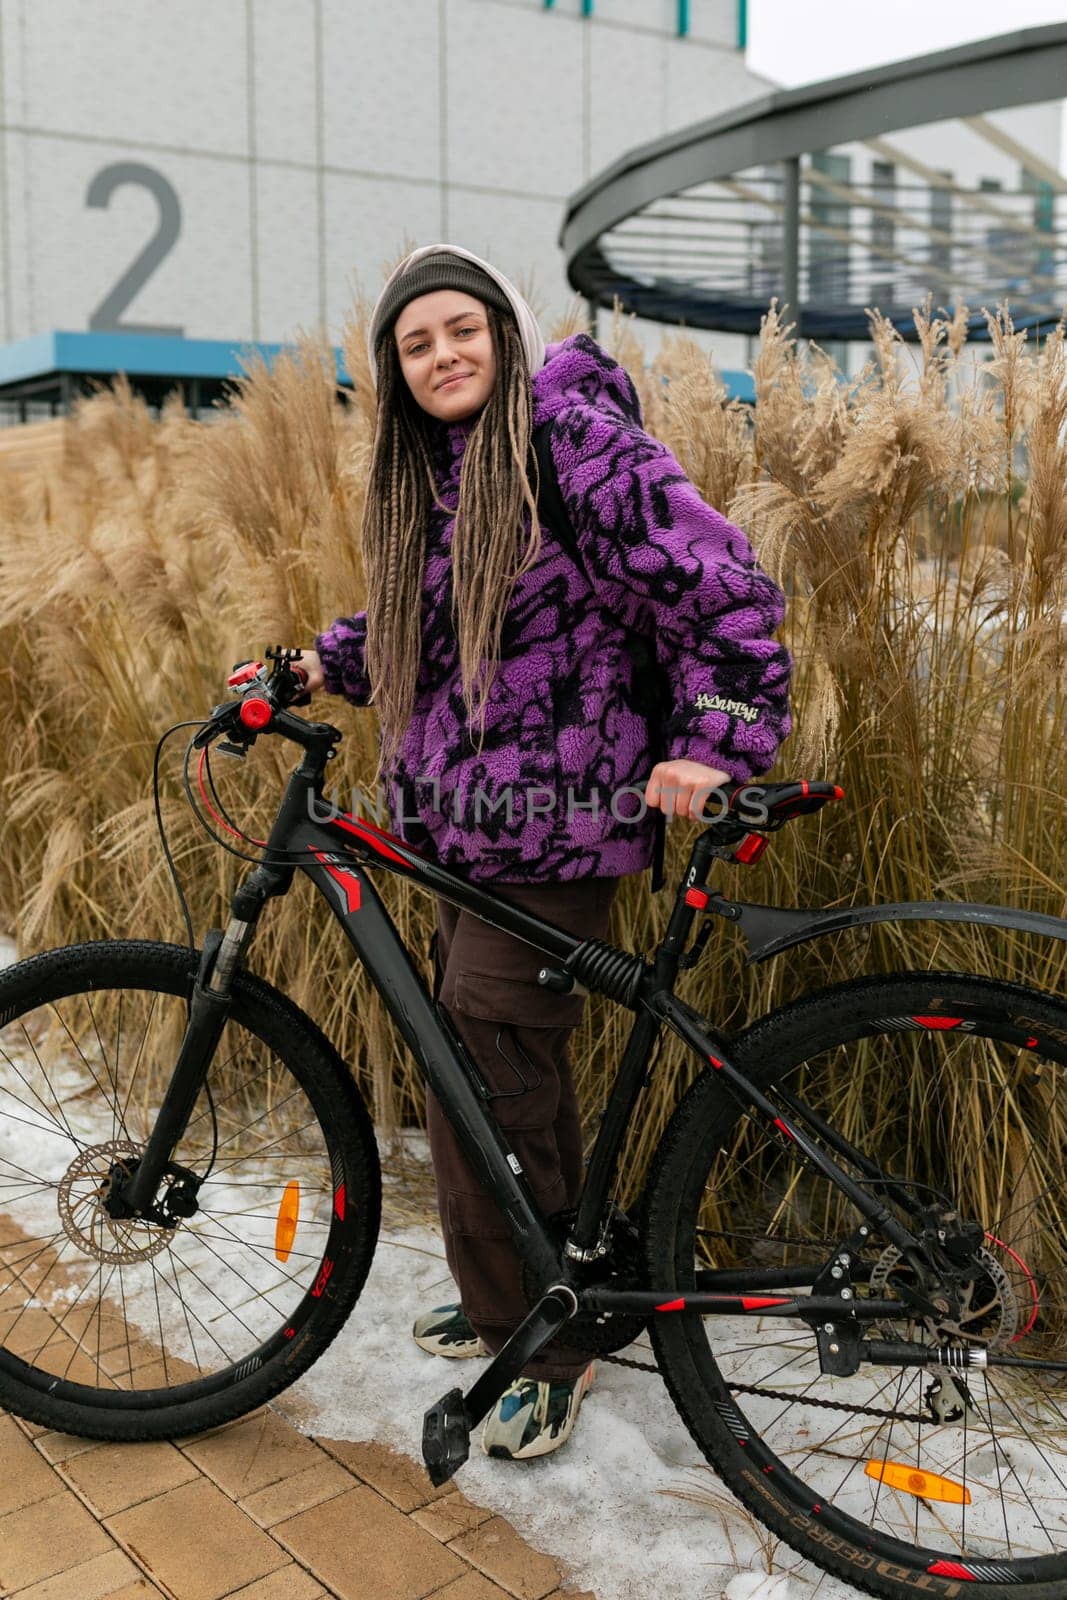 Lifestyle concept. Young woman with informal dreadlocks hairstyle rented a bicycle by TRMK